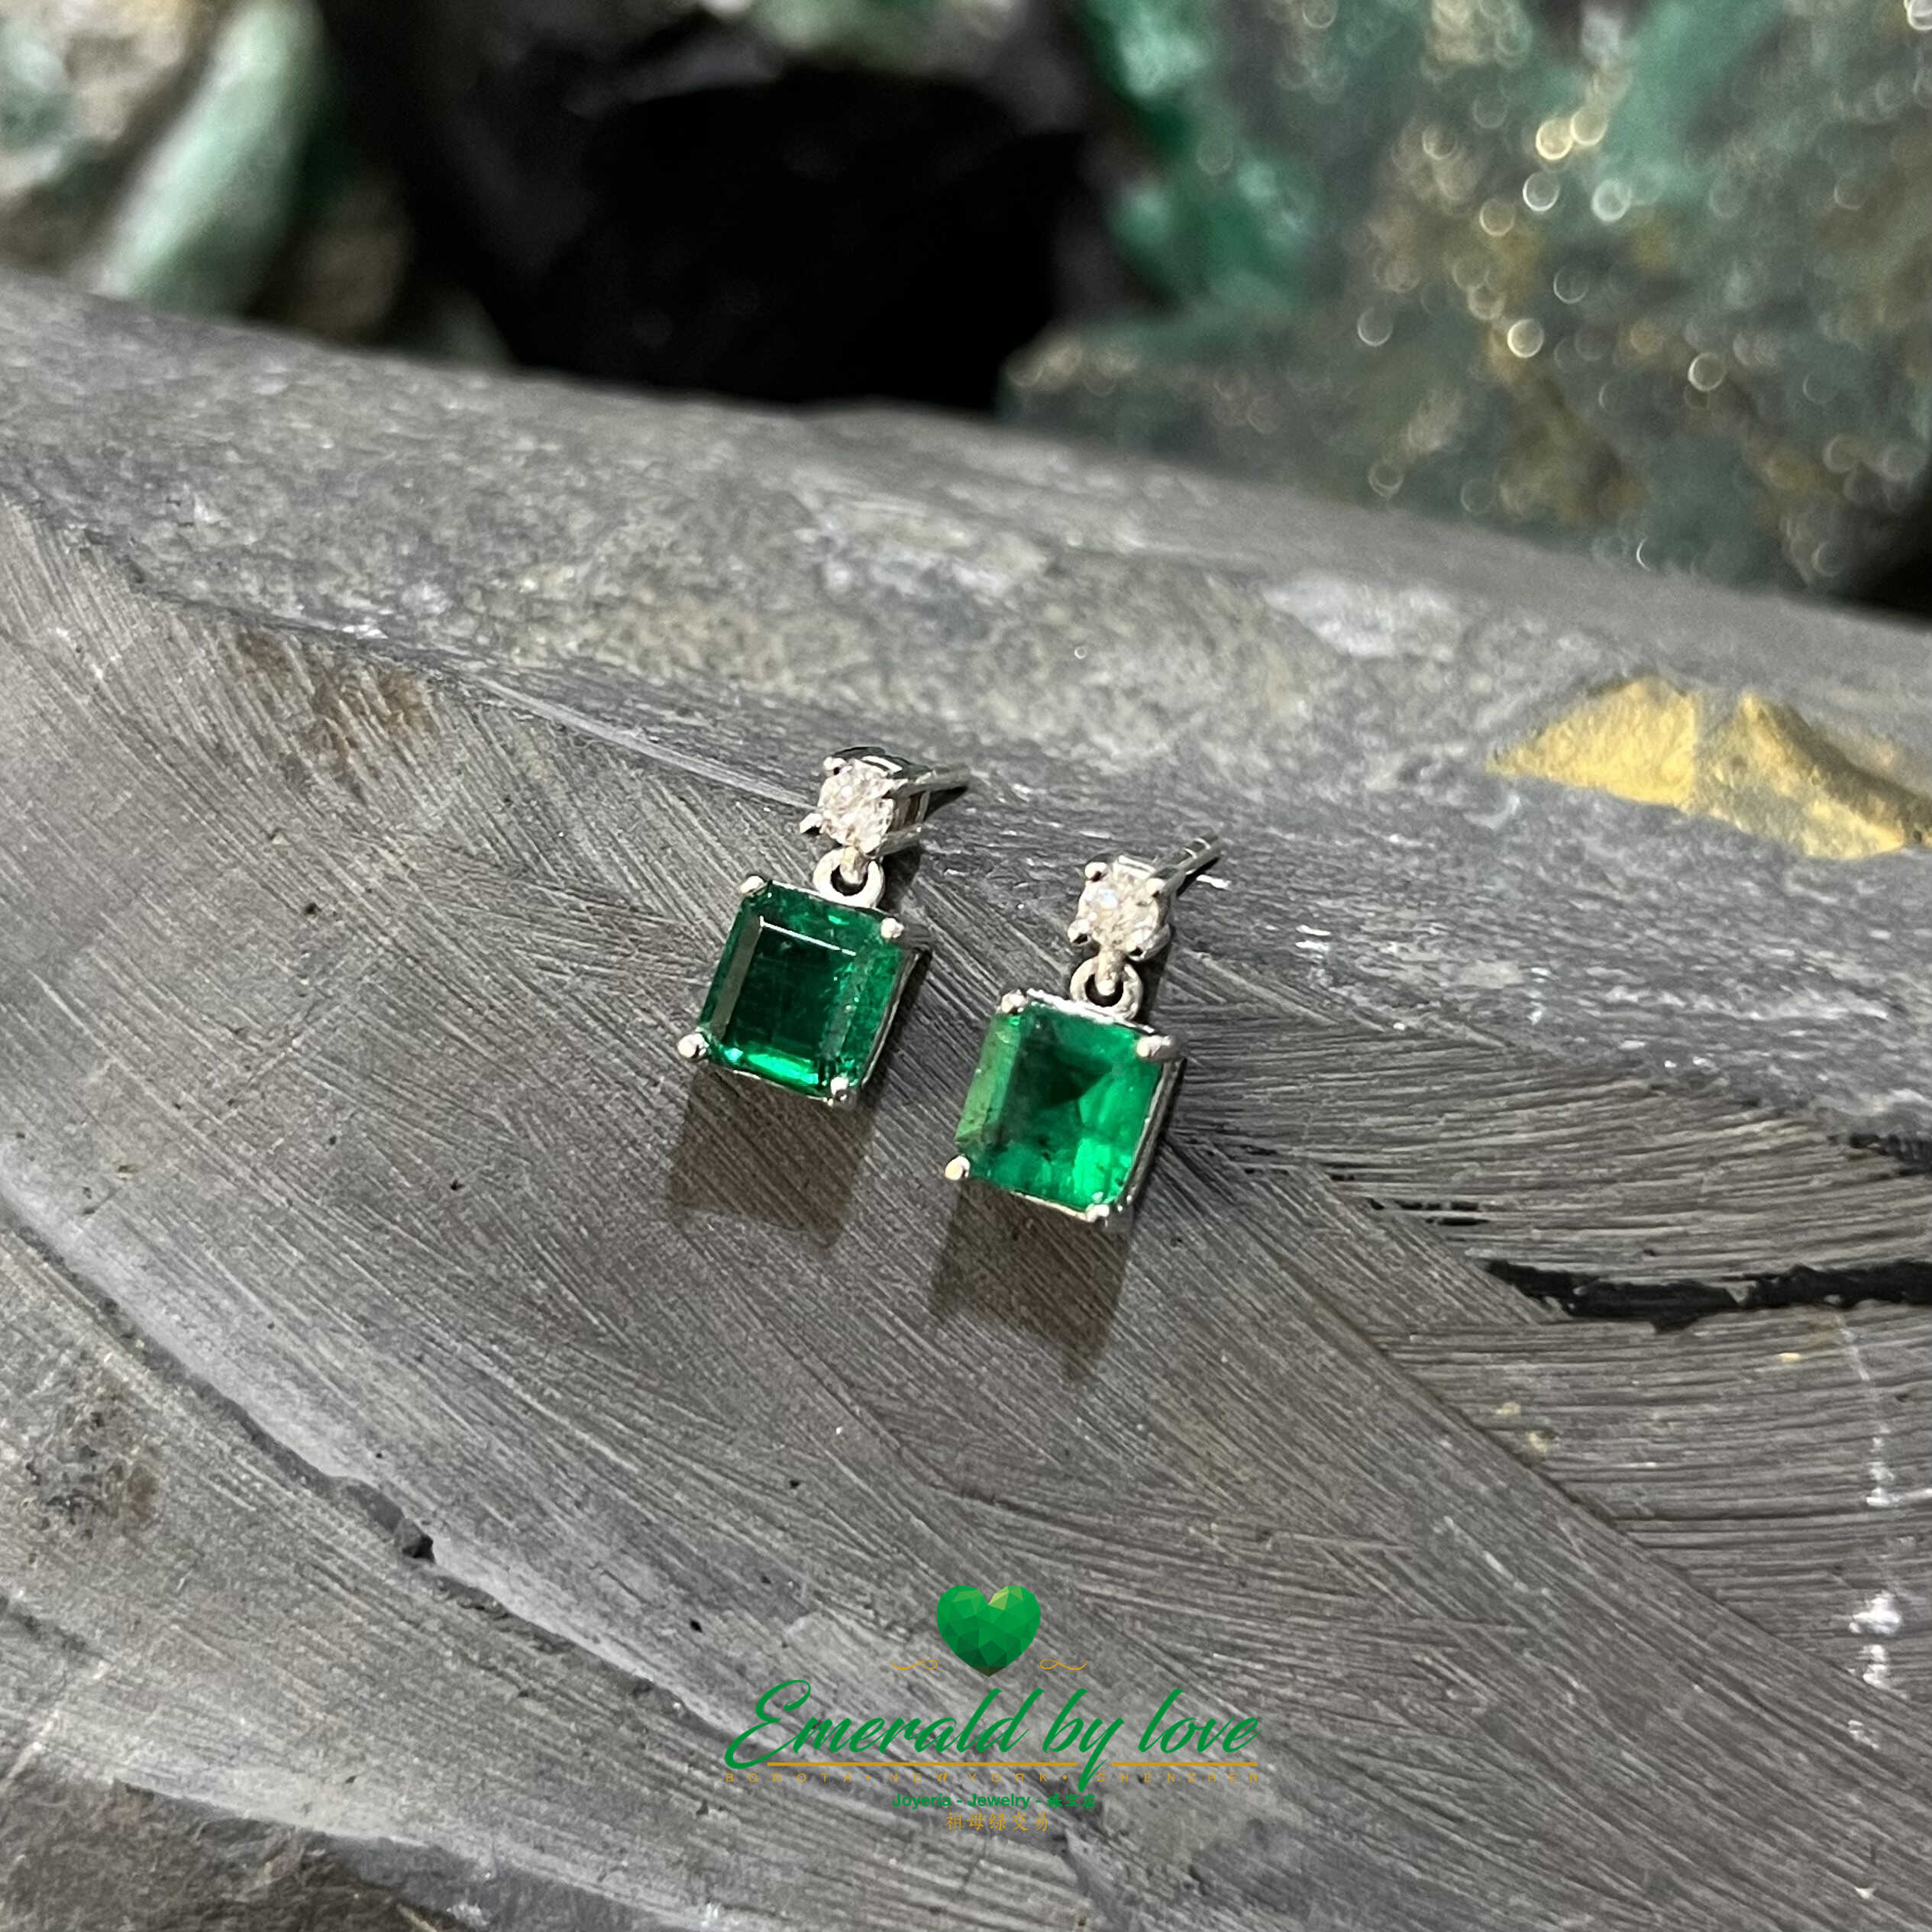 Chic Square Colombian Emerald and Diamond White Gold Earrings - 2.26 Ct Square Gems